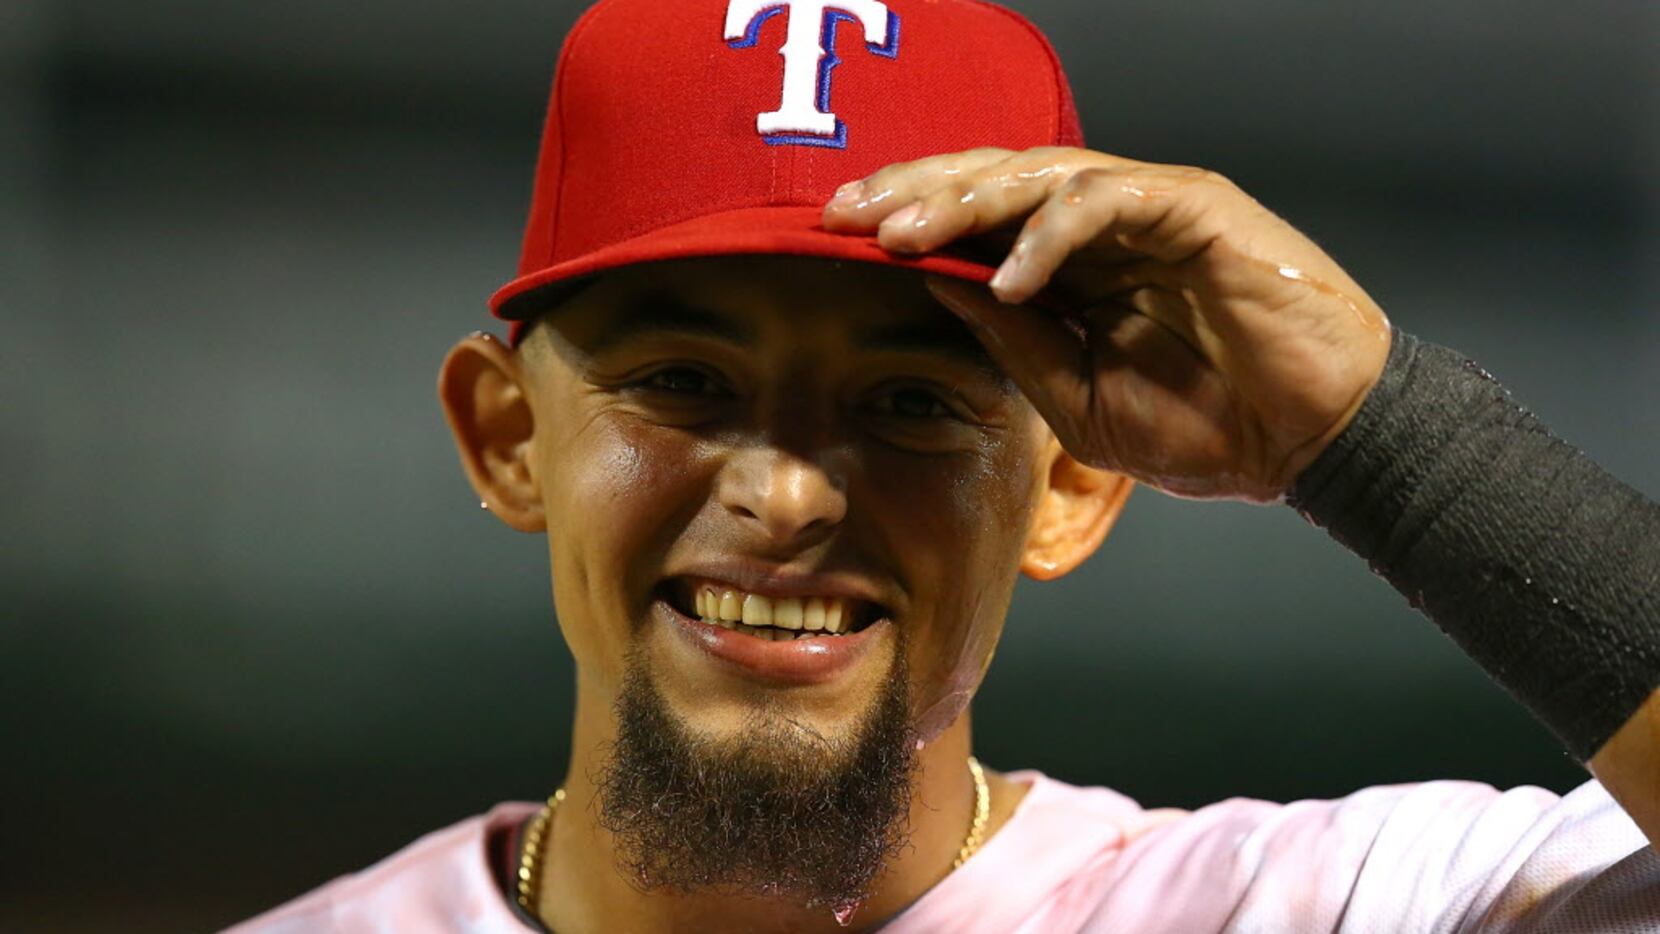 WATCH: Legendary Dodgers announcer Vin Scully can't believe Rangers' Rougned  Odor has brother with same name